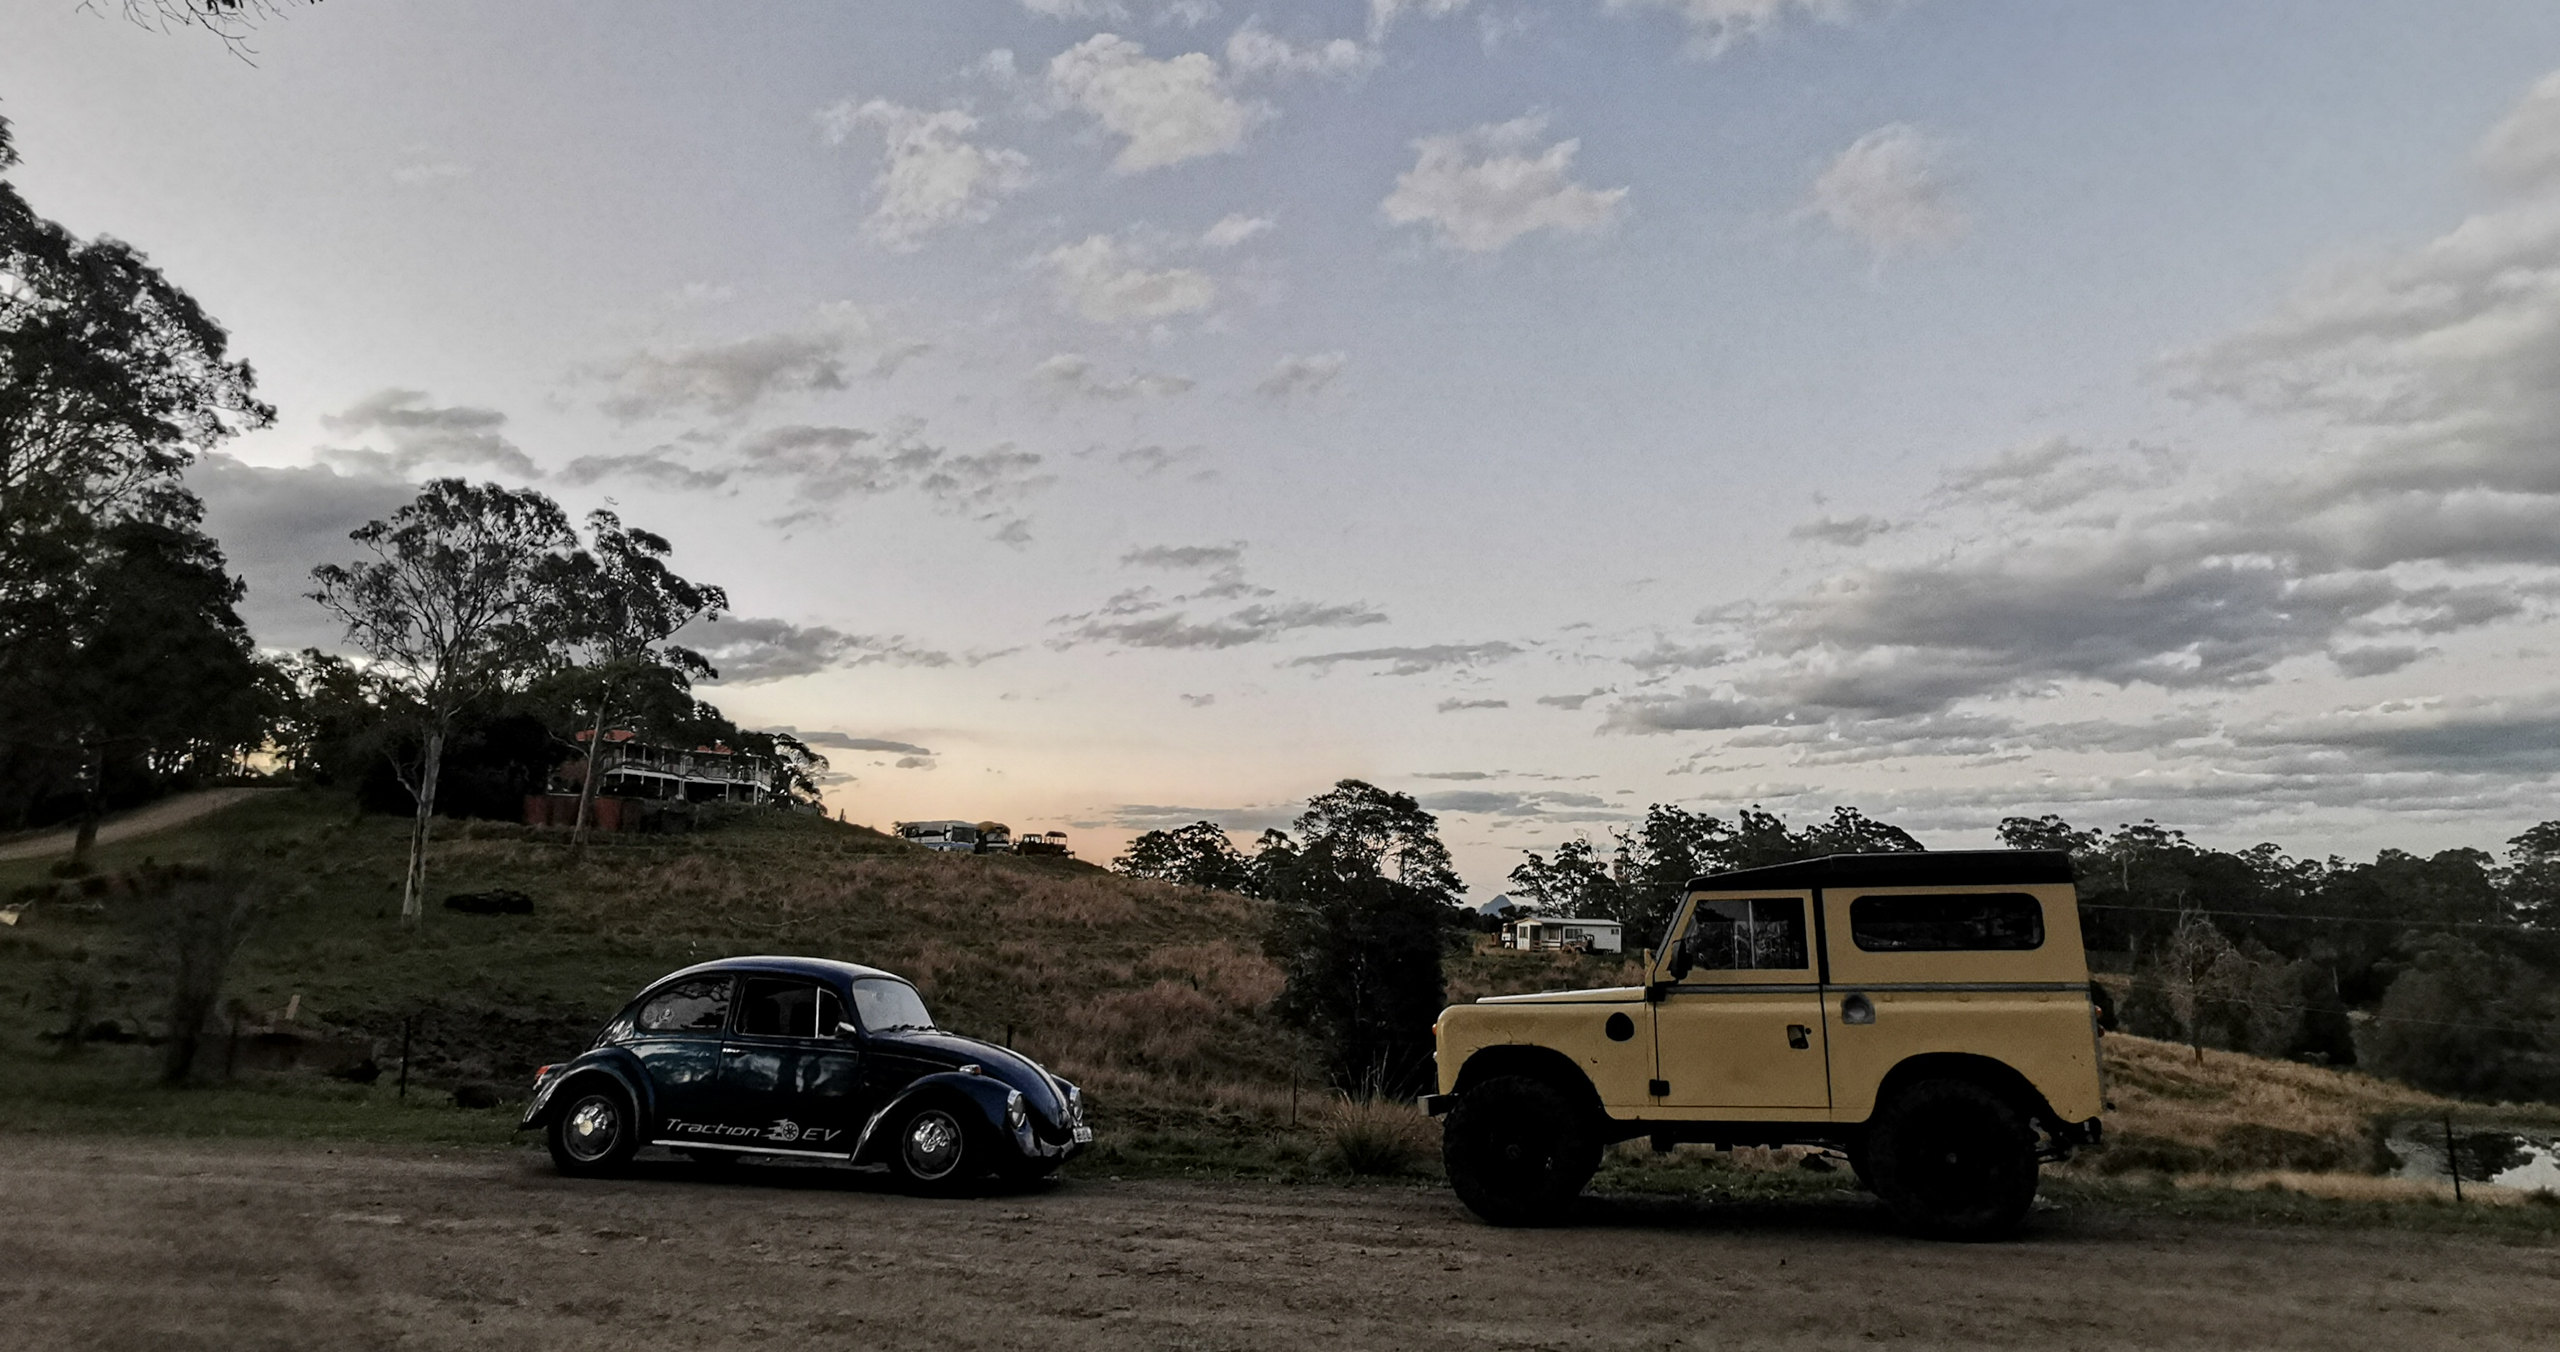 The electric 1973 Series 2 Land Rover and the 1968 EV Beetle facing off at dusk.